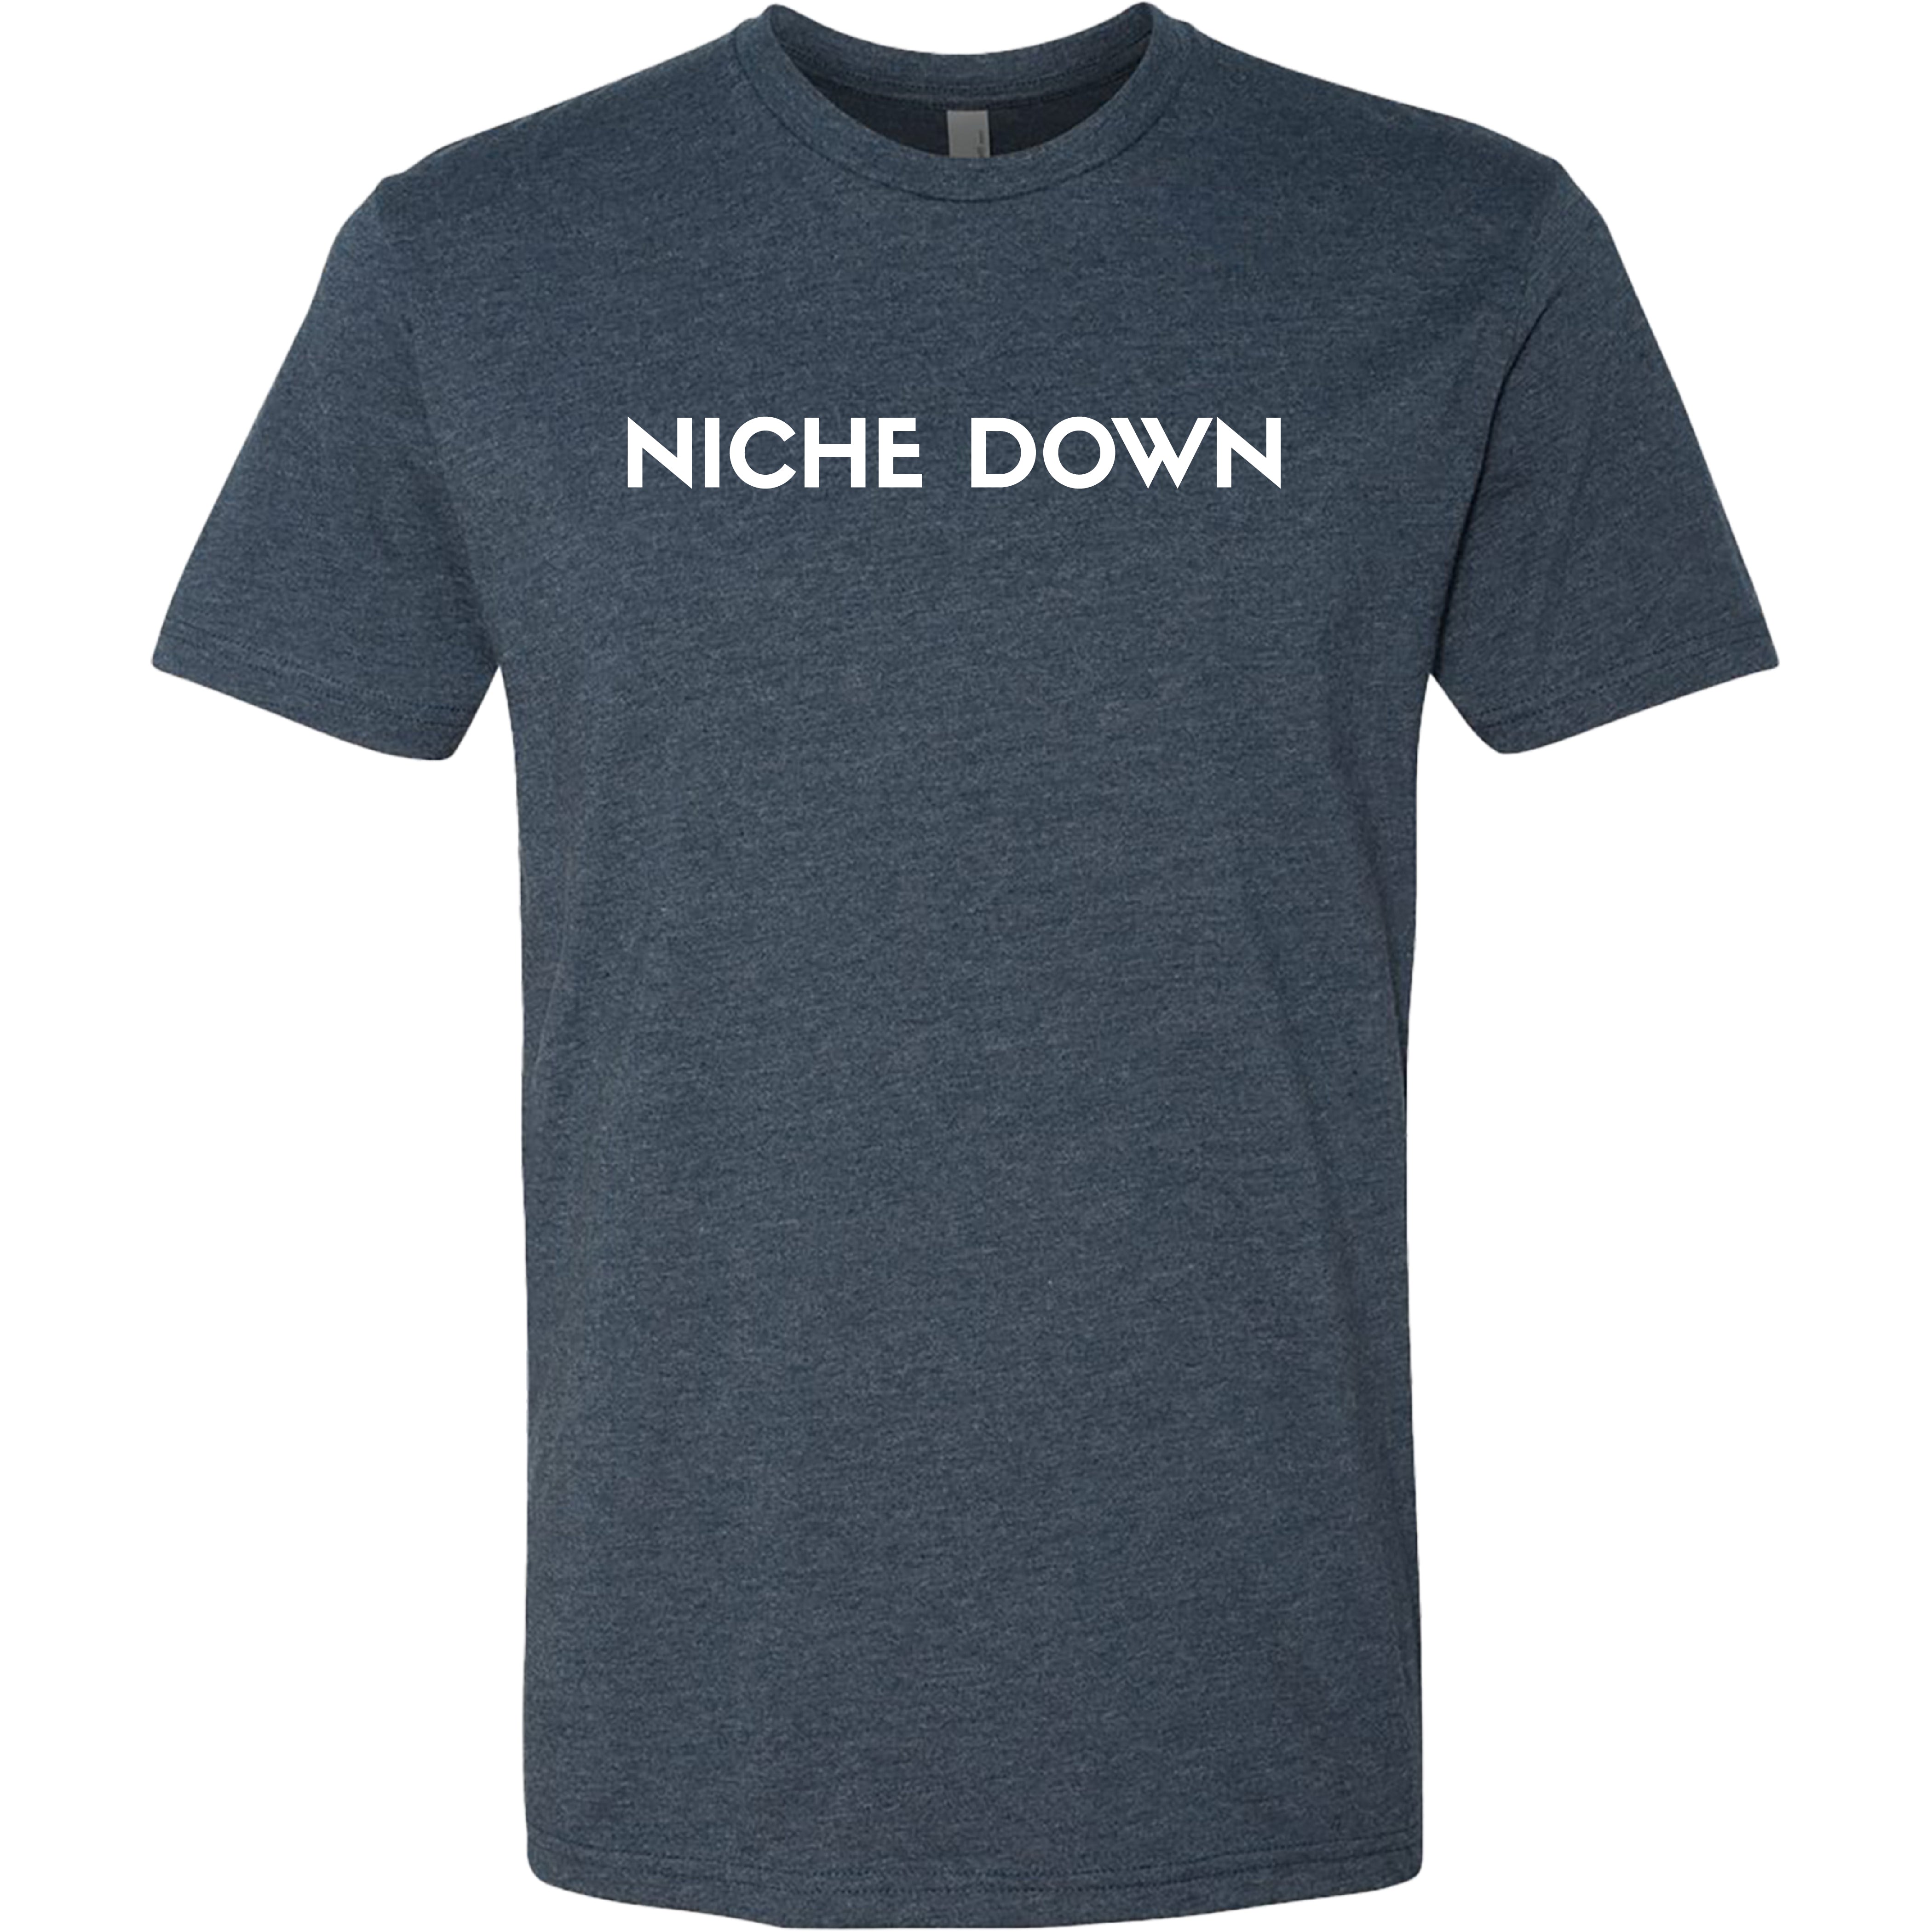 Freelance with Phil - Niche Down Tee